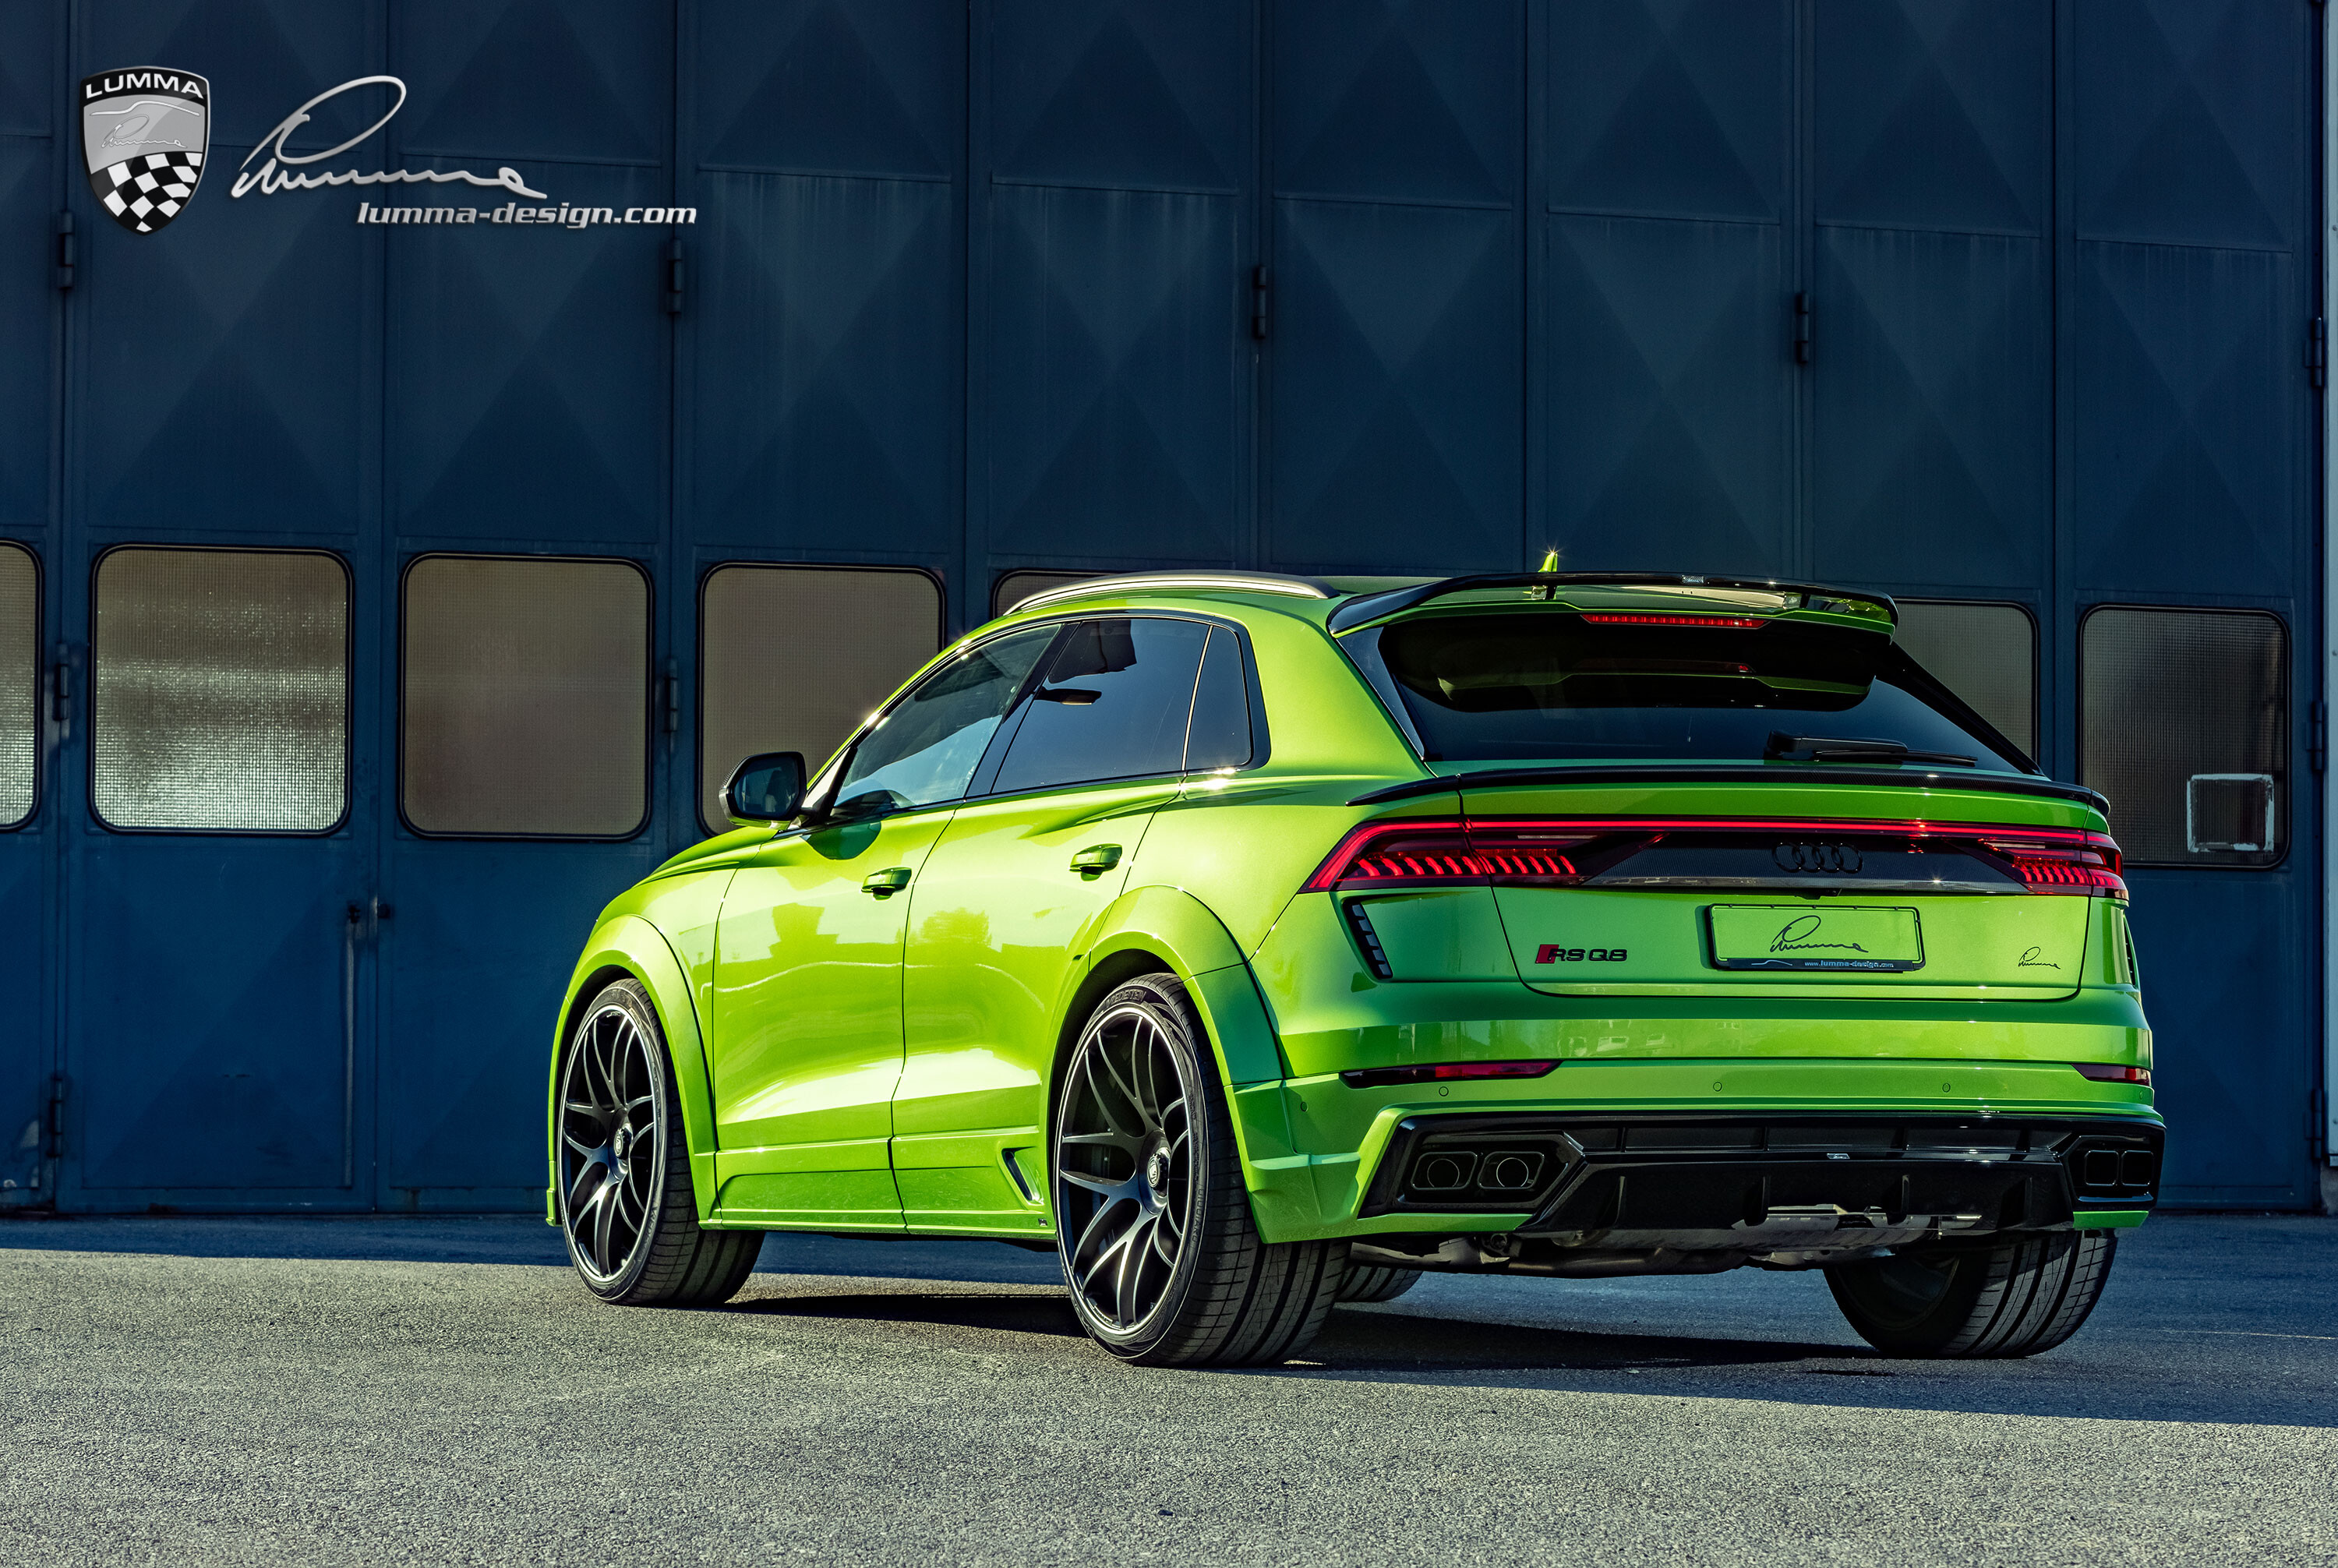 Check our price and buy Lumma CLR 8RS body kit for Audi RSQ8!